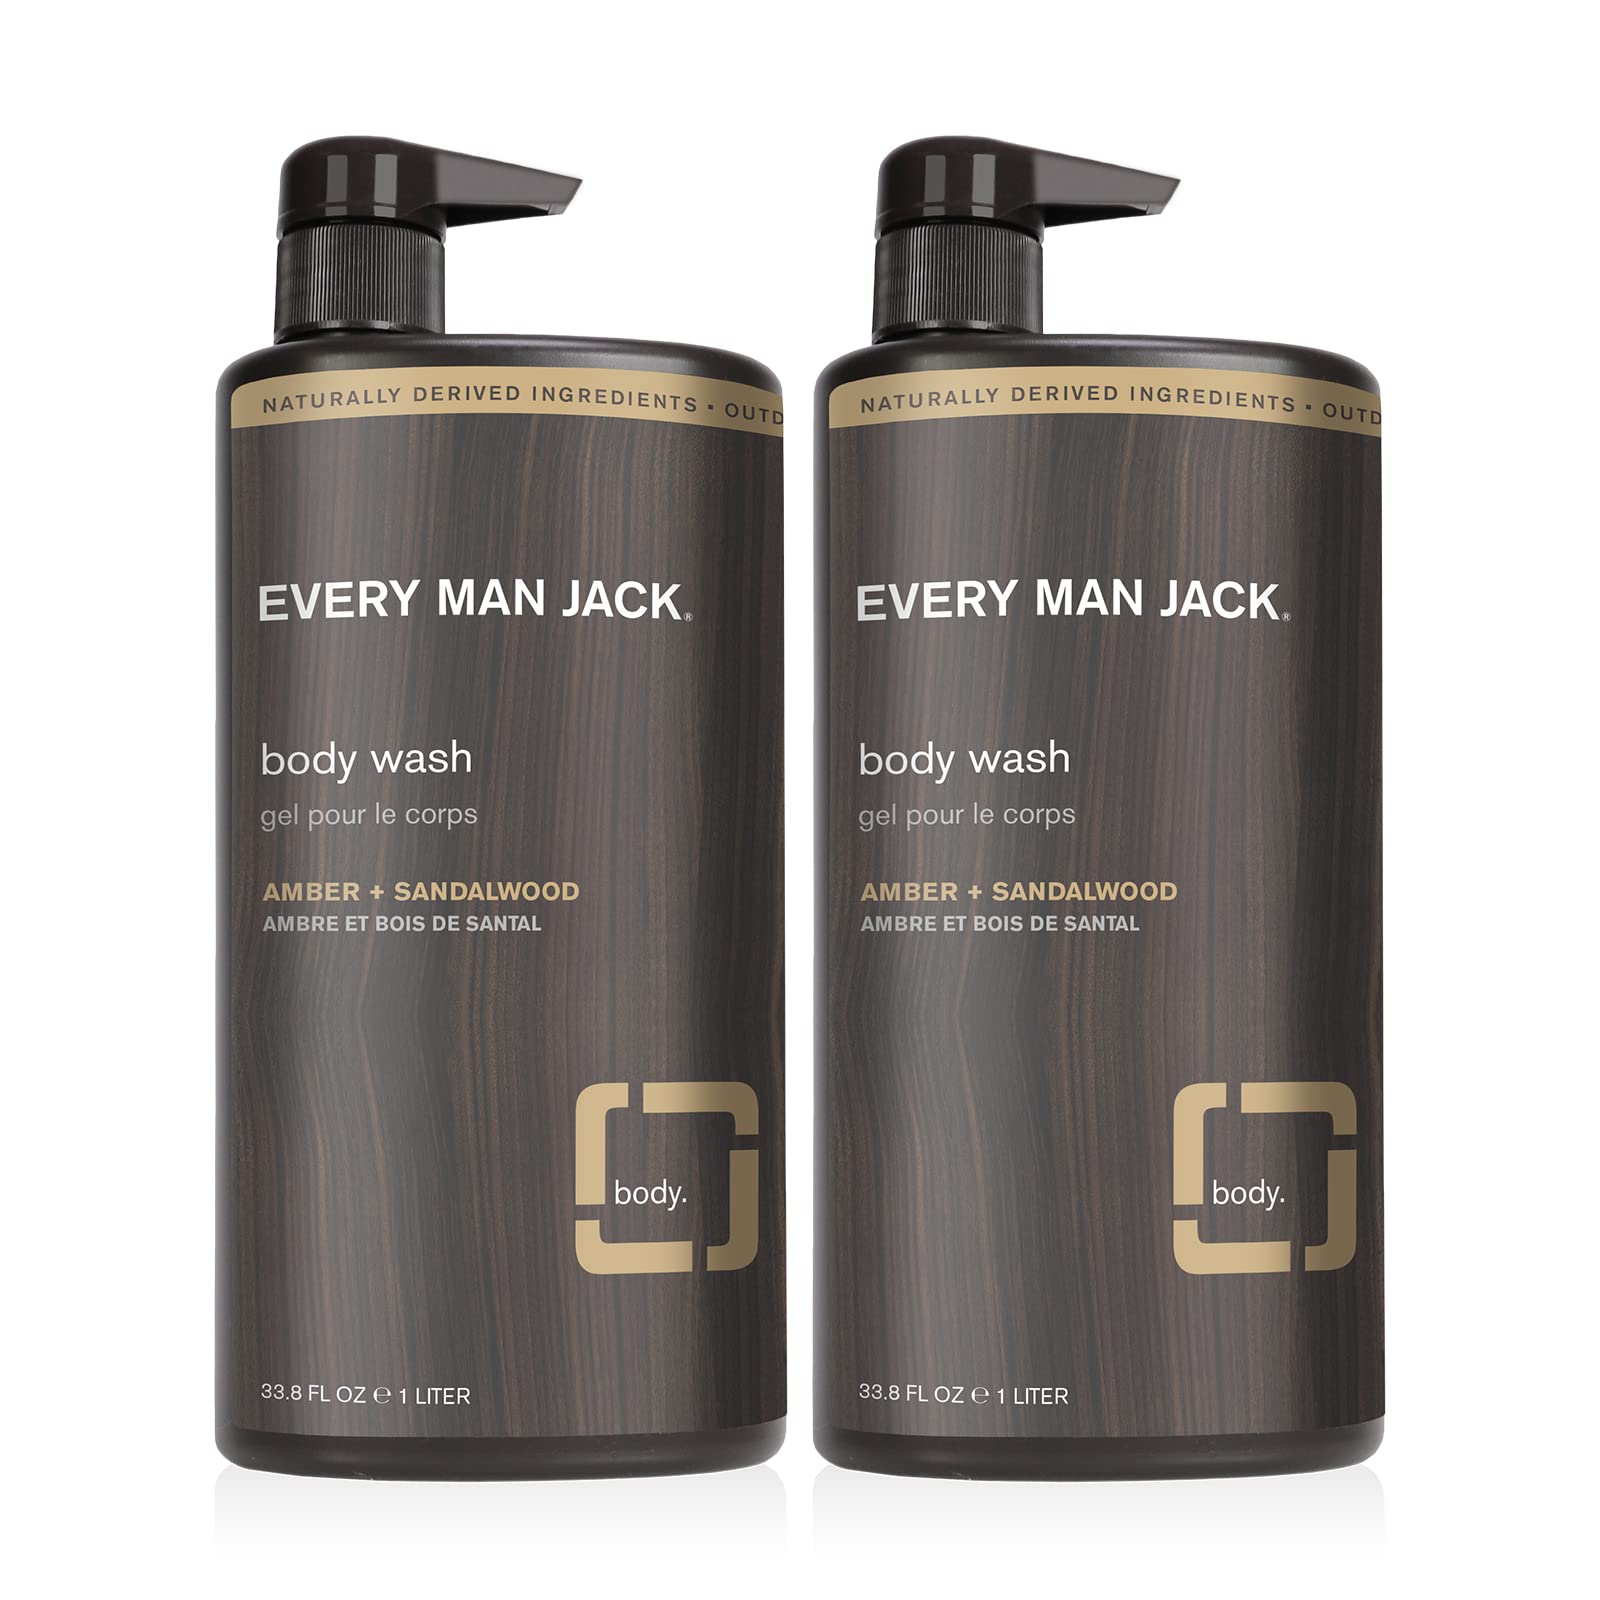 Every Man Jack Men’s Body + Hair Bundle - Cleanse and Hydrate All Skin & Hair Types with Clean Ingredients and an Amber + Sandalwood Scent -Liter Body Wash Twin Pack, Deo Twin Pack, and 2-in-1 Shampoo